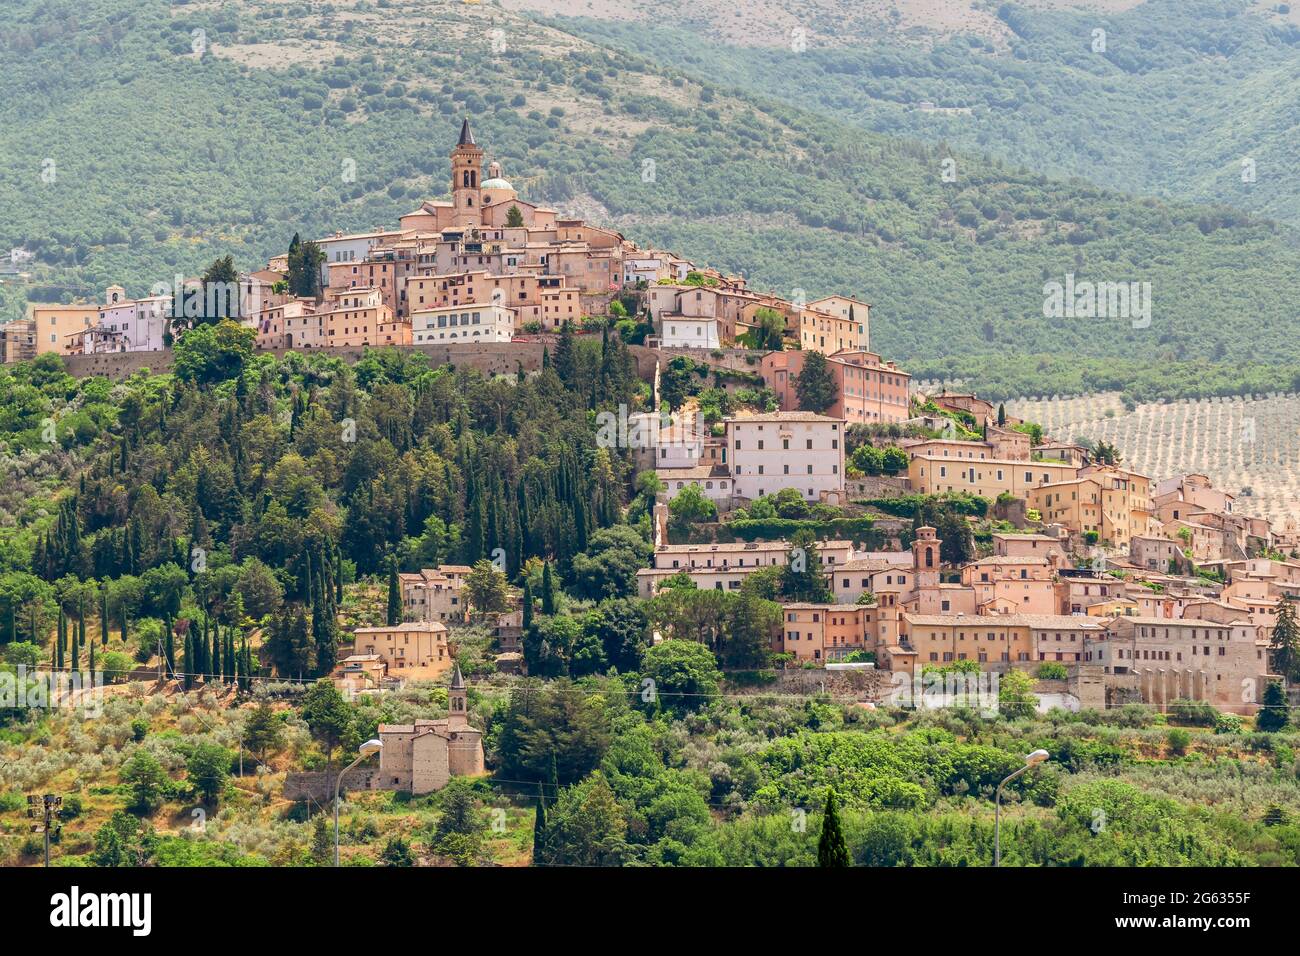 Panoramic view of the ancient hilltop village of Trevi, Perugia, Umbria ...